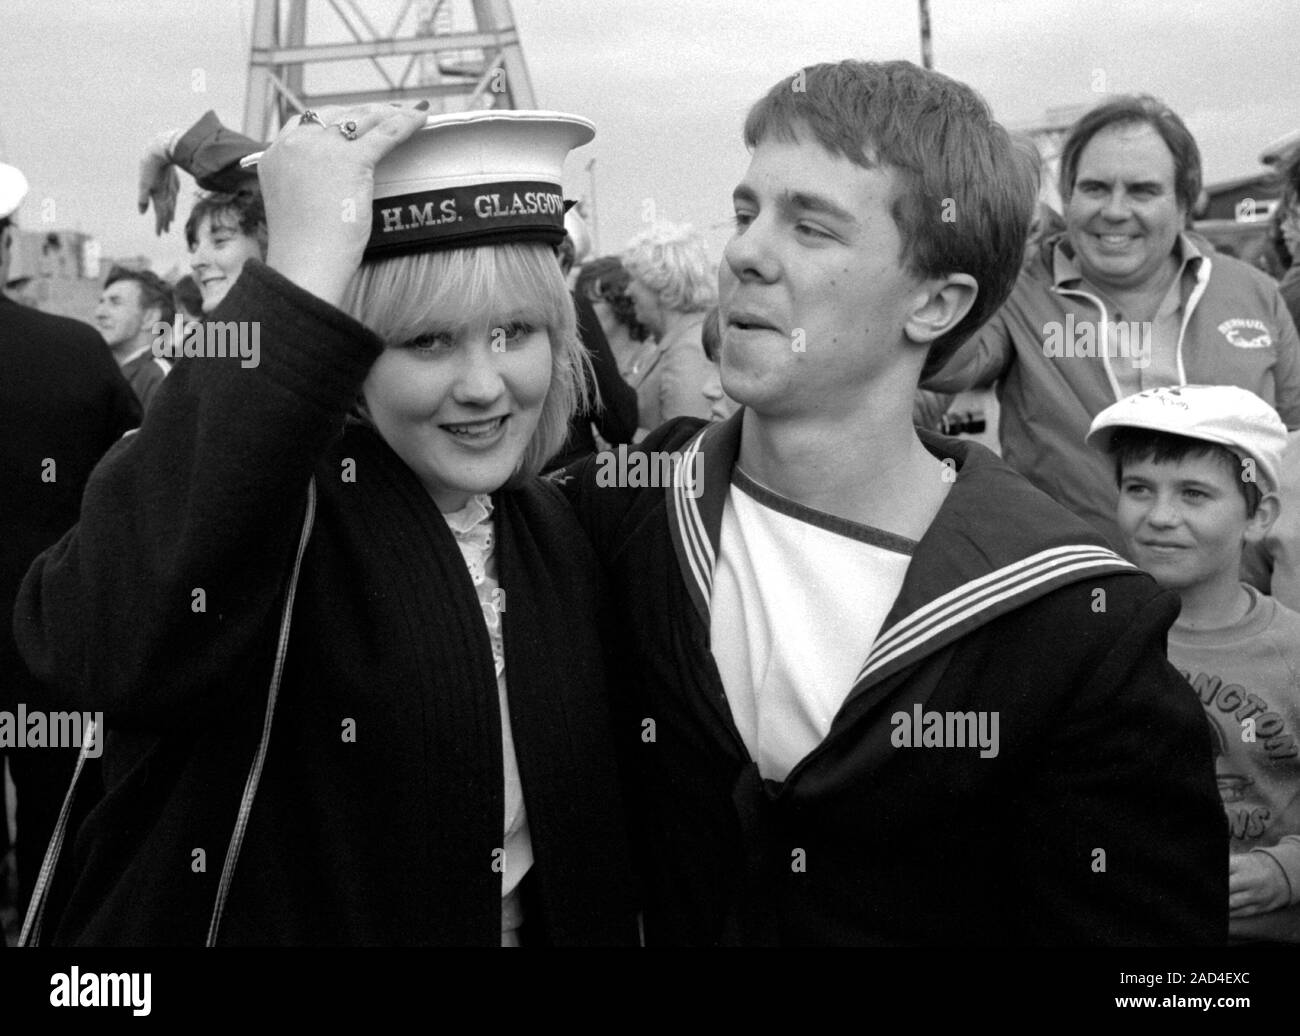 AJAXNETPHOTO. 19TH JUNE, 1982 - PORTSMOUTH, ENGLAND. - FALKLANDS VETERAN - A SAILOR OF THE SHEFFIELD CLASS (TYPE 42/1&2) DESTROYER HMS GLASGOW LOSES HIS HAT TO A PRETTY YOUNG RELATIVE WHEN HIS BOMB DAMAGED SHIP RETURNED TO PORTSMOUTH IN 1982.  PHOTO:JONATHAN EASTLAND/AJAX.  REF:HD NA GLAS 82 16. Stock Photo